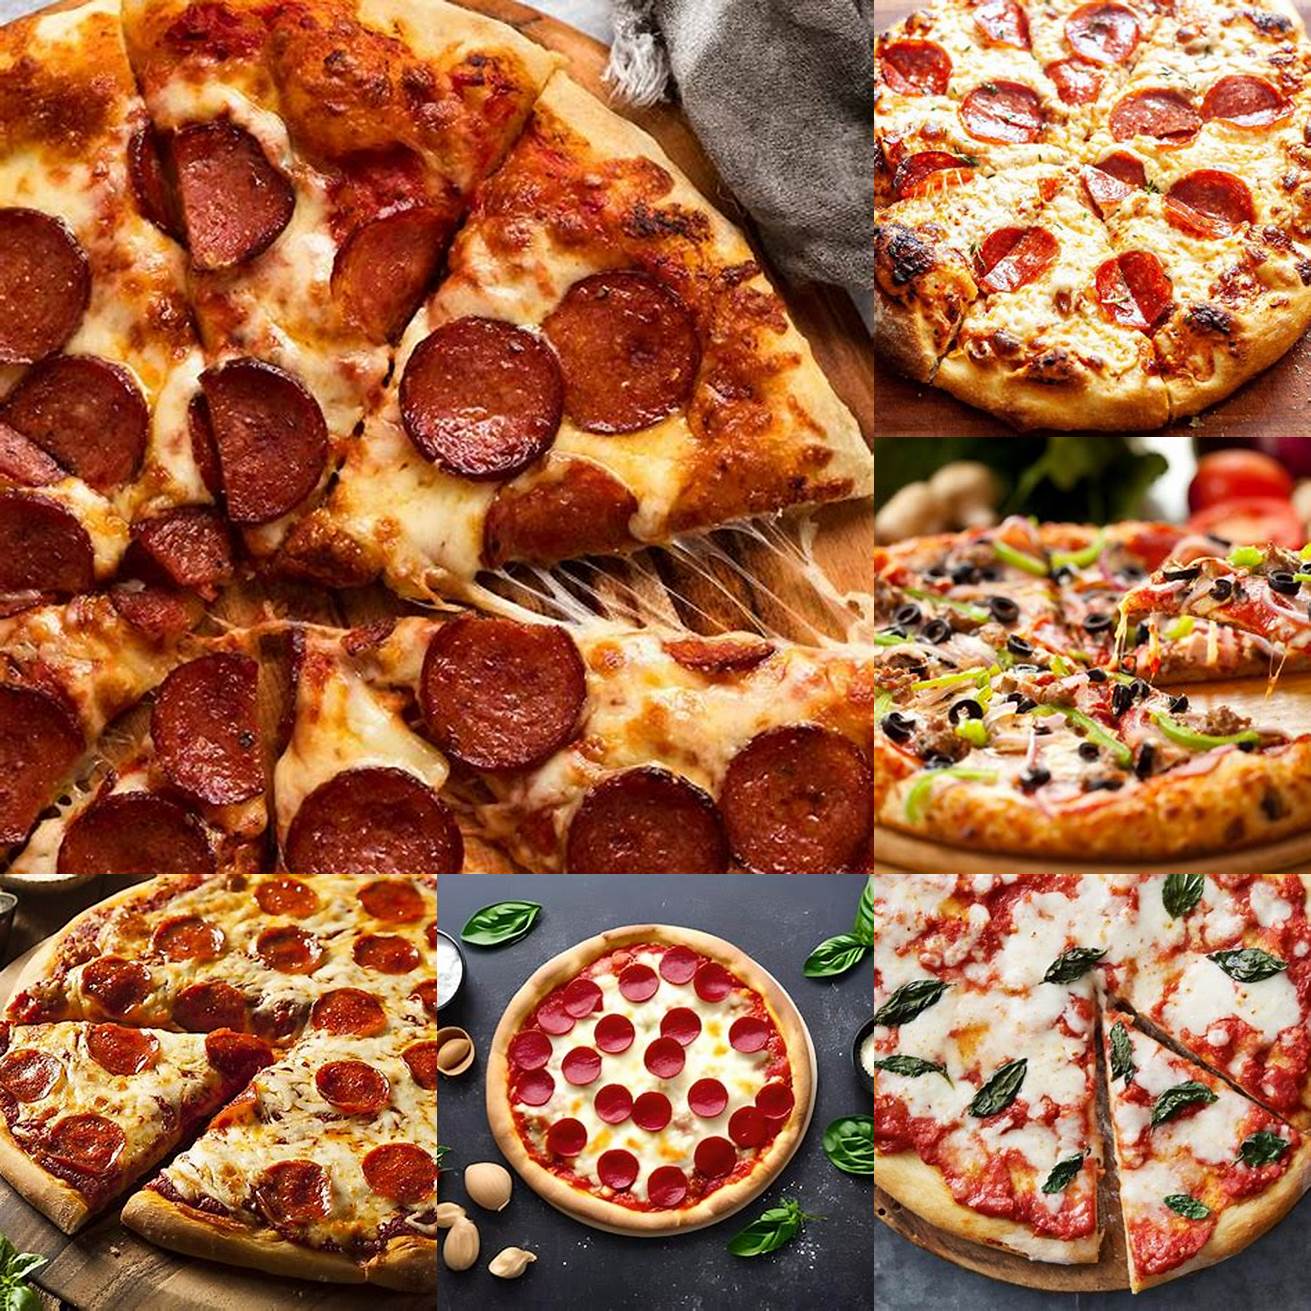 Pizza While pizza originated in Italy it has become a staple in American cuisine Popular toppings include pepperoni sausage and mushrooms